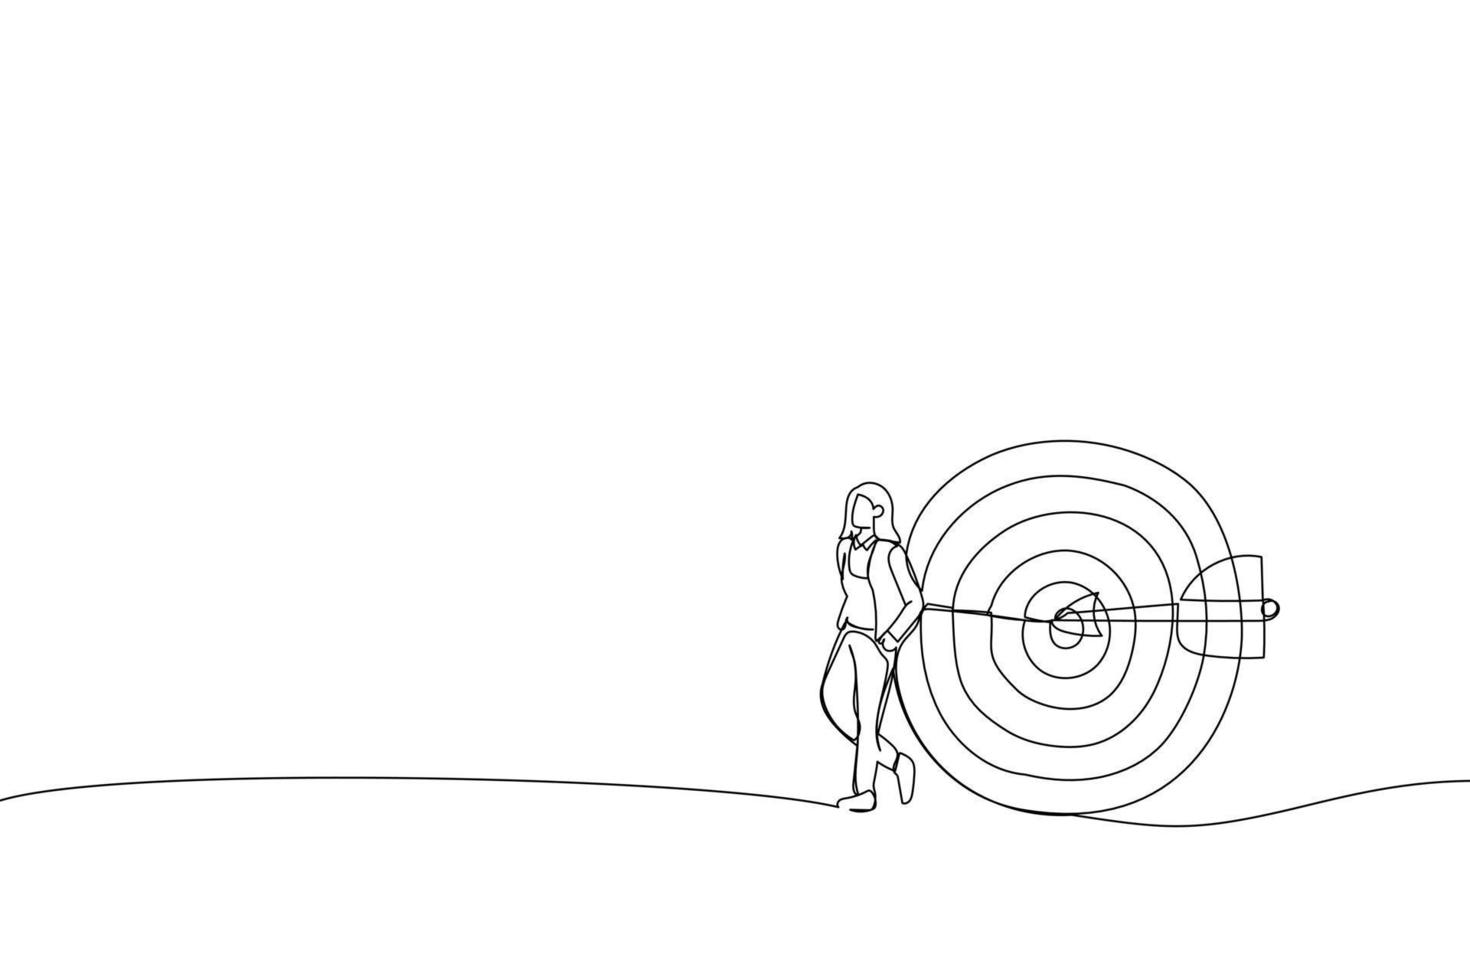 Cartoon of businesswoman stand with arrow hit bullseye on archery target. Metaphor for business objective, purpose or target, goal and resolution to aim for success. Single continuous line art style vector